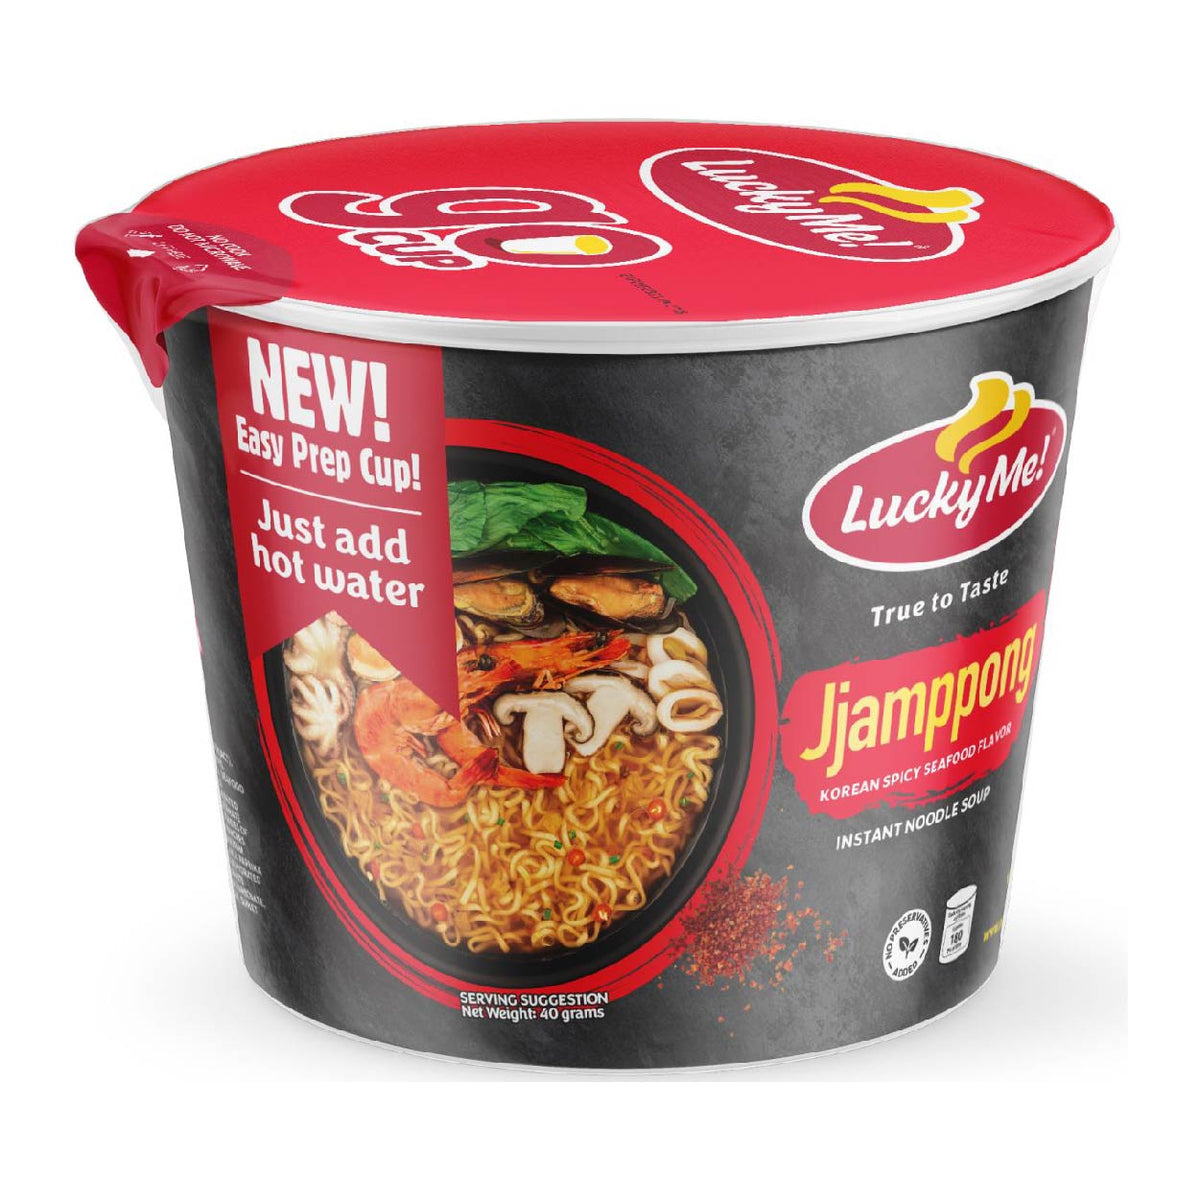 Lucky Me! Go Cup Special Beef 40g — .